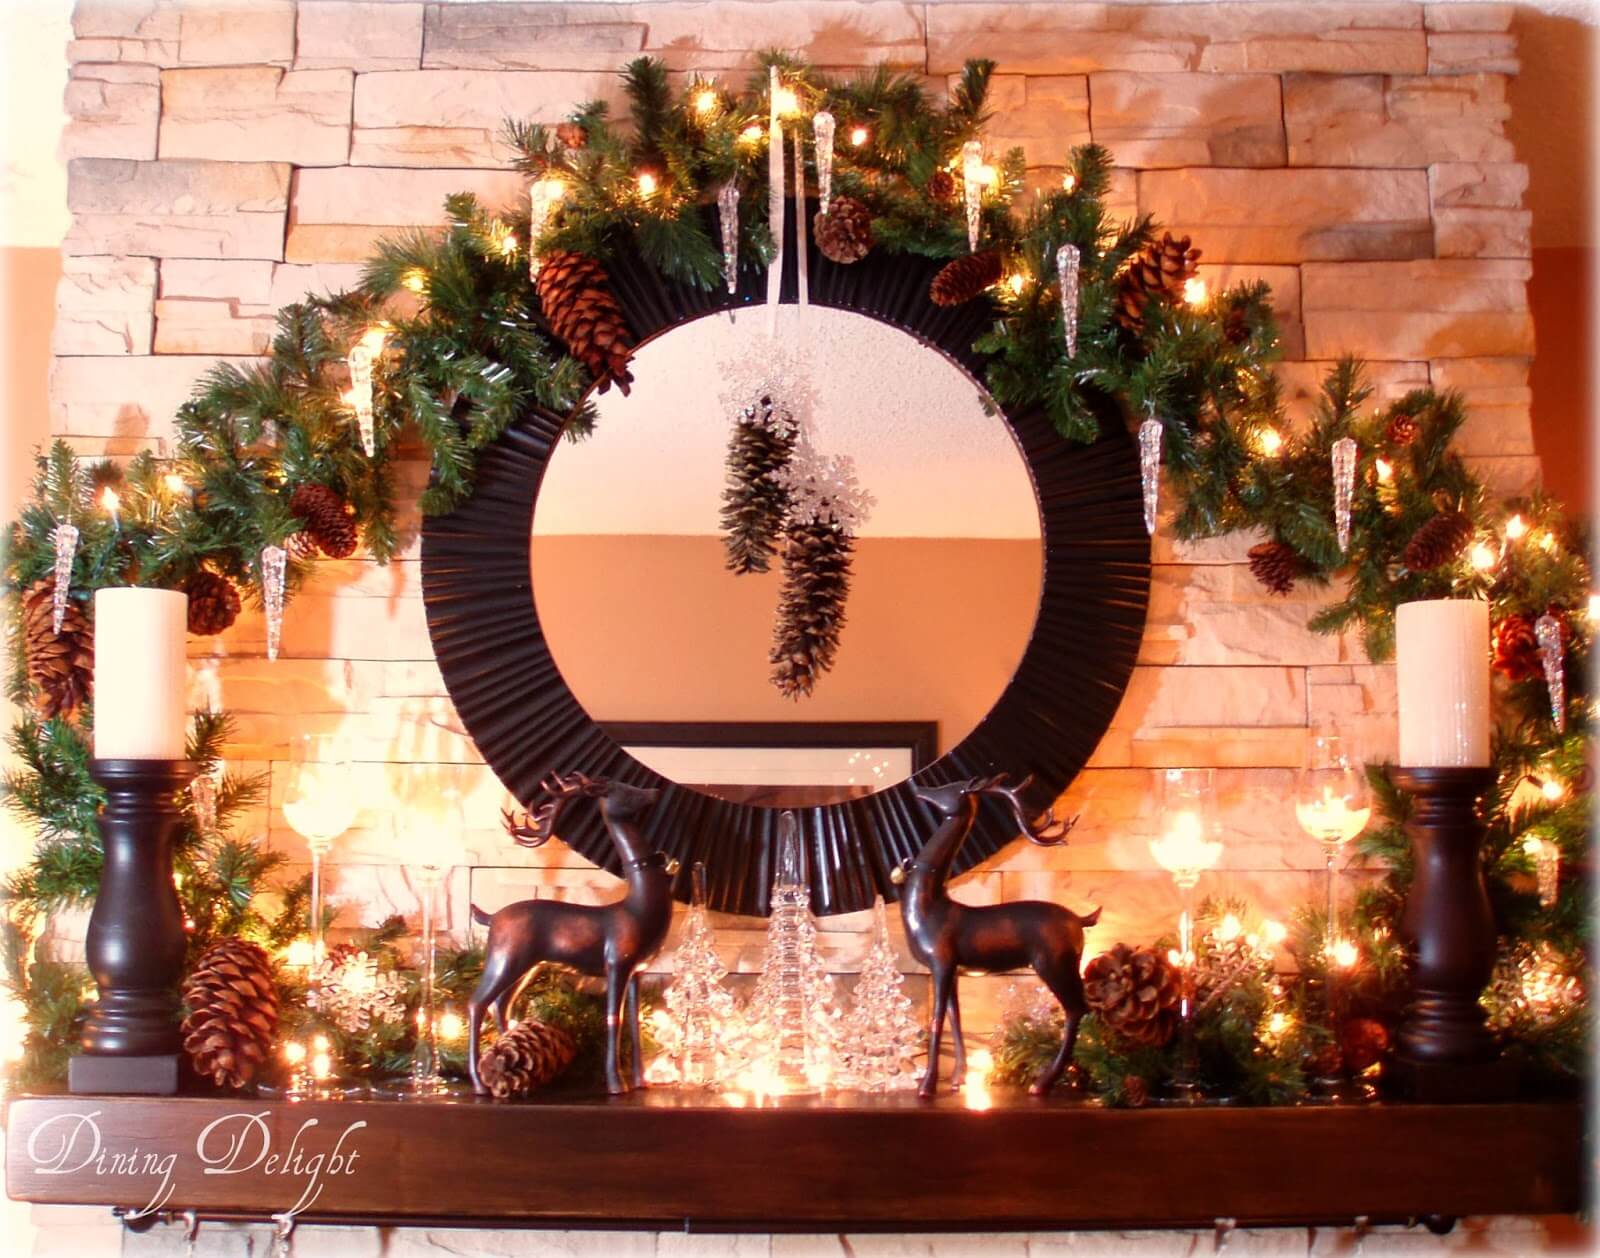 Transform Your Hearth with Pinecone Decor